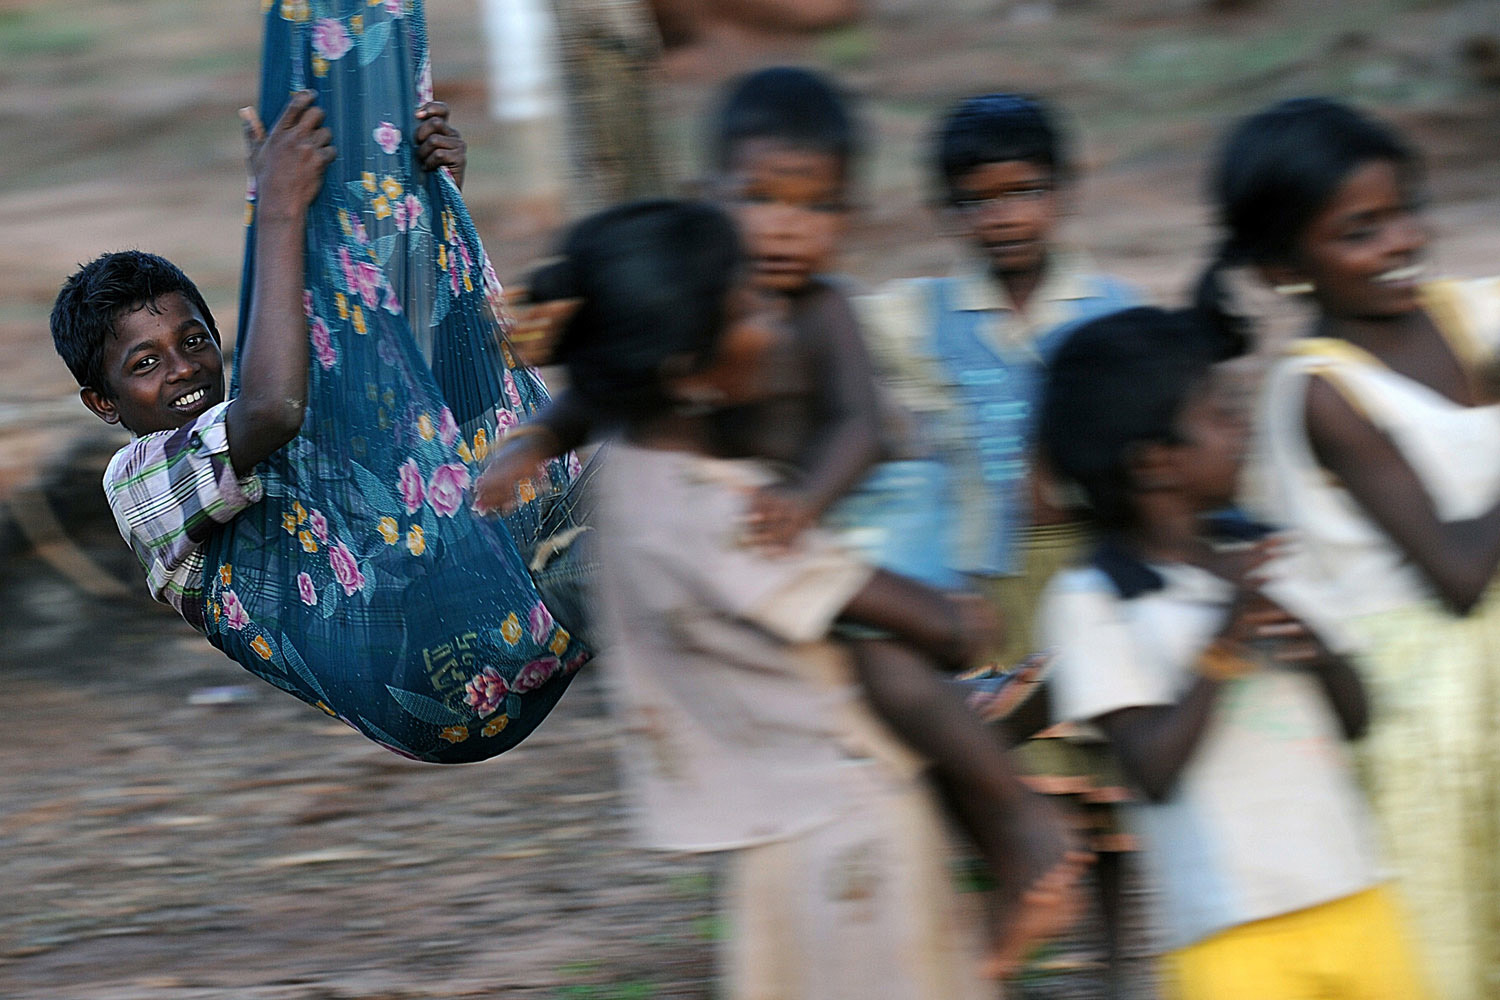 Image: Oct. 21, 2012. Sri Lankan Tamil children play on a swing in a village in the former war zone district of Mullaittivu. The United States and the UN have expressed concern over "rushed re-settlement" of thousands of Tamil civilians displaced by Sri Lanka's separatist war that ended three years ago.